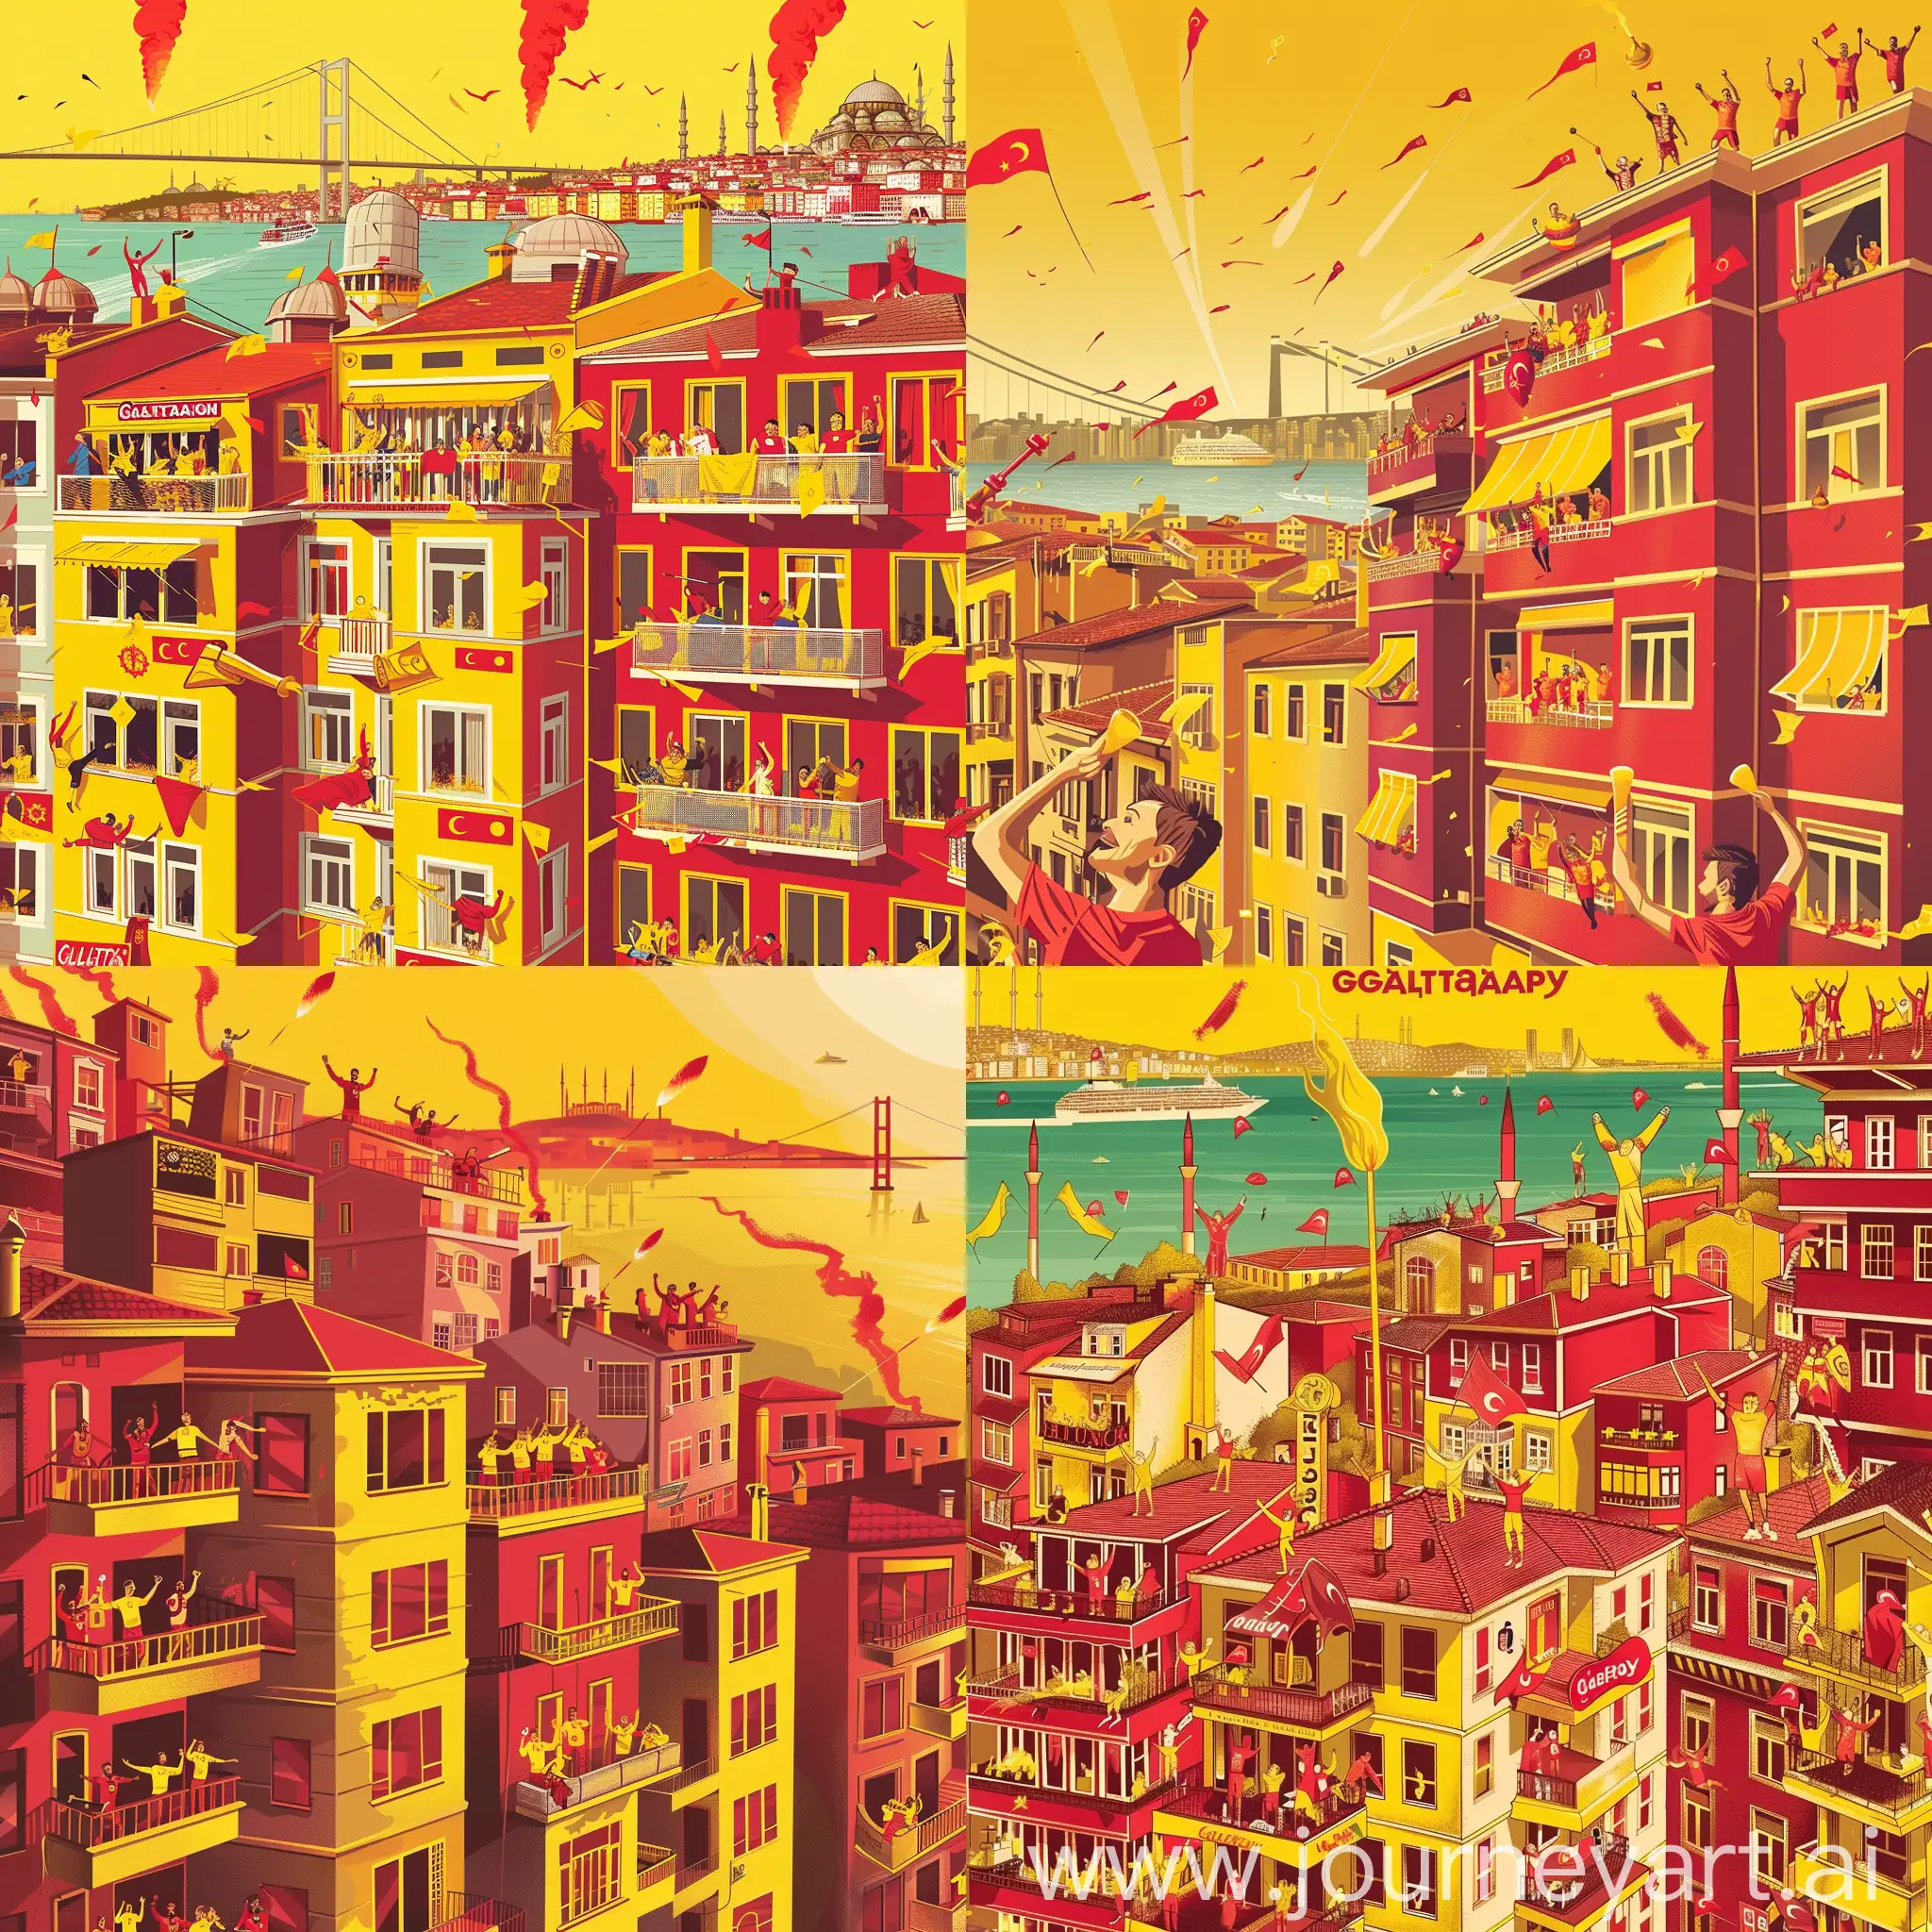 Galatasaray-Championship-Celebration-Fans-and-Buildings-in-YellowRed-Glory